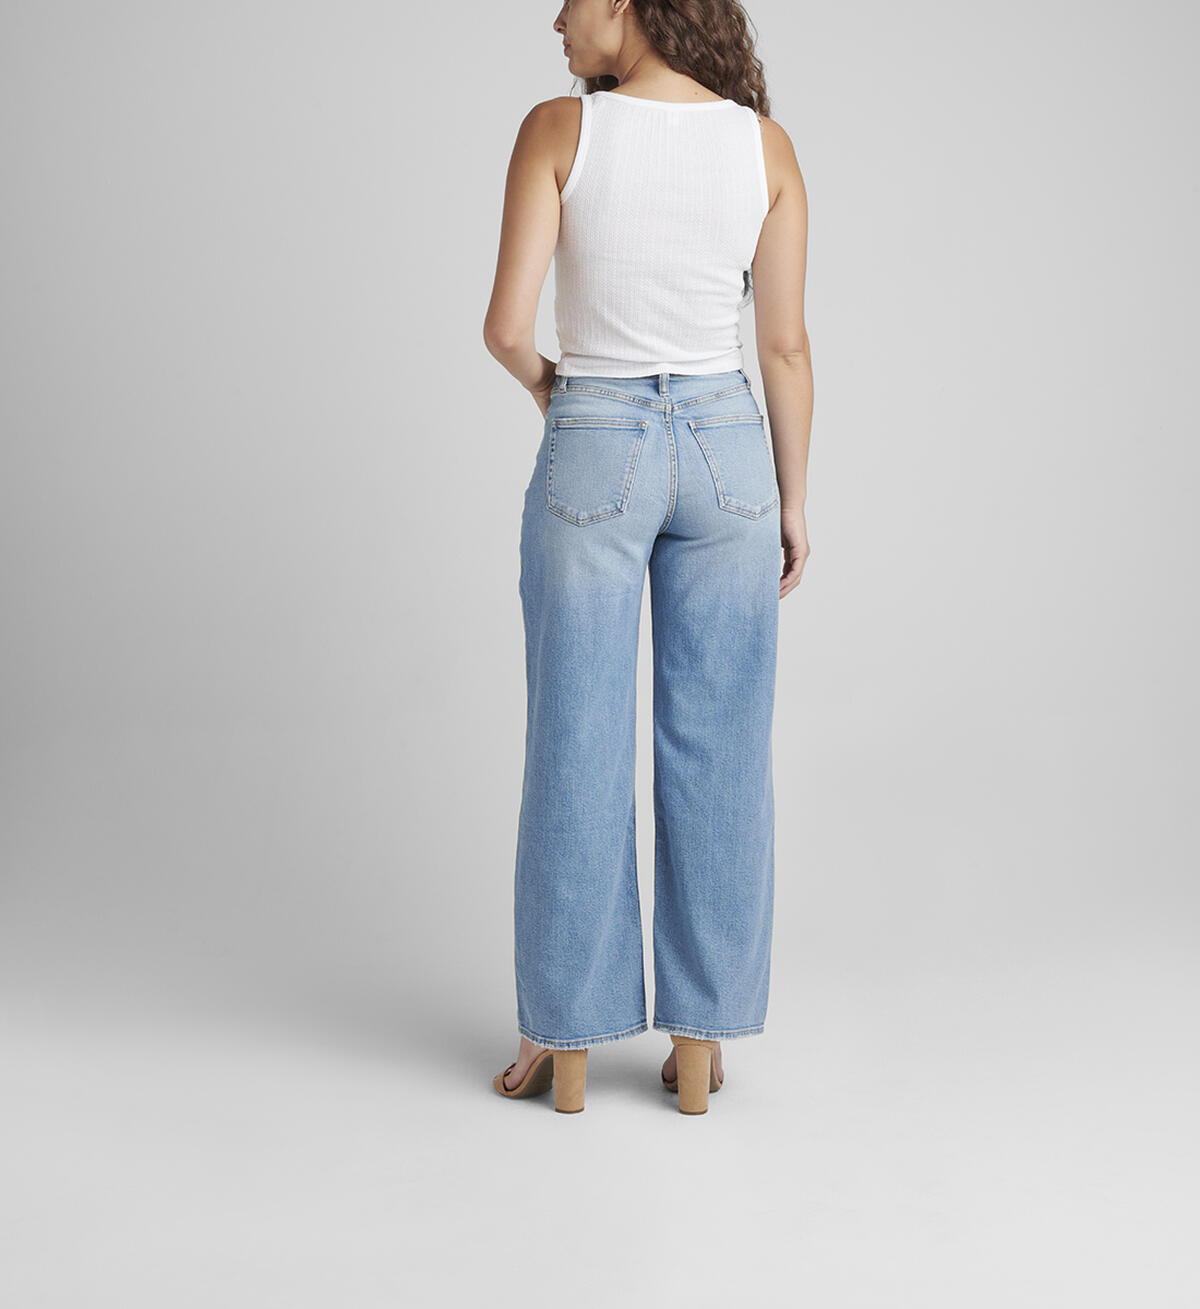 Highly Desirable High Rise Loose Leg Jeans, , hi-res image number 1